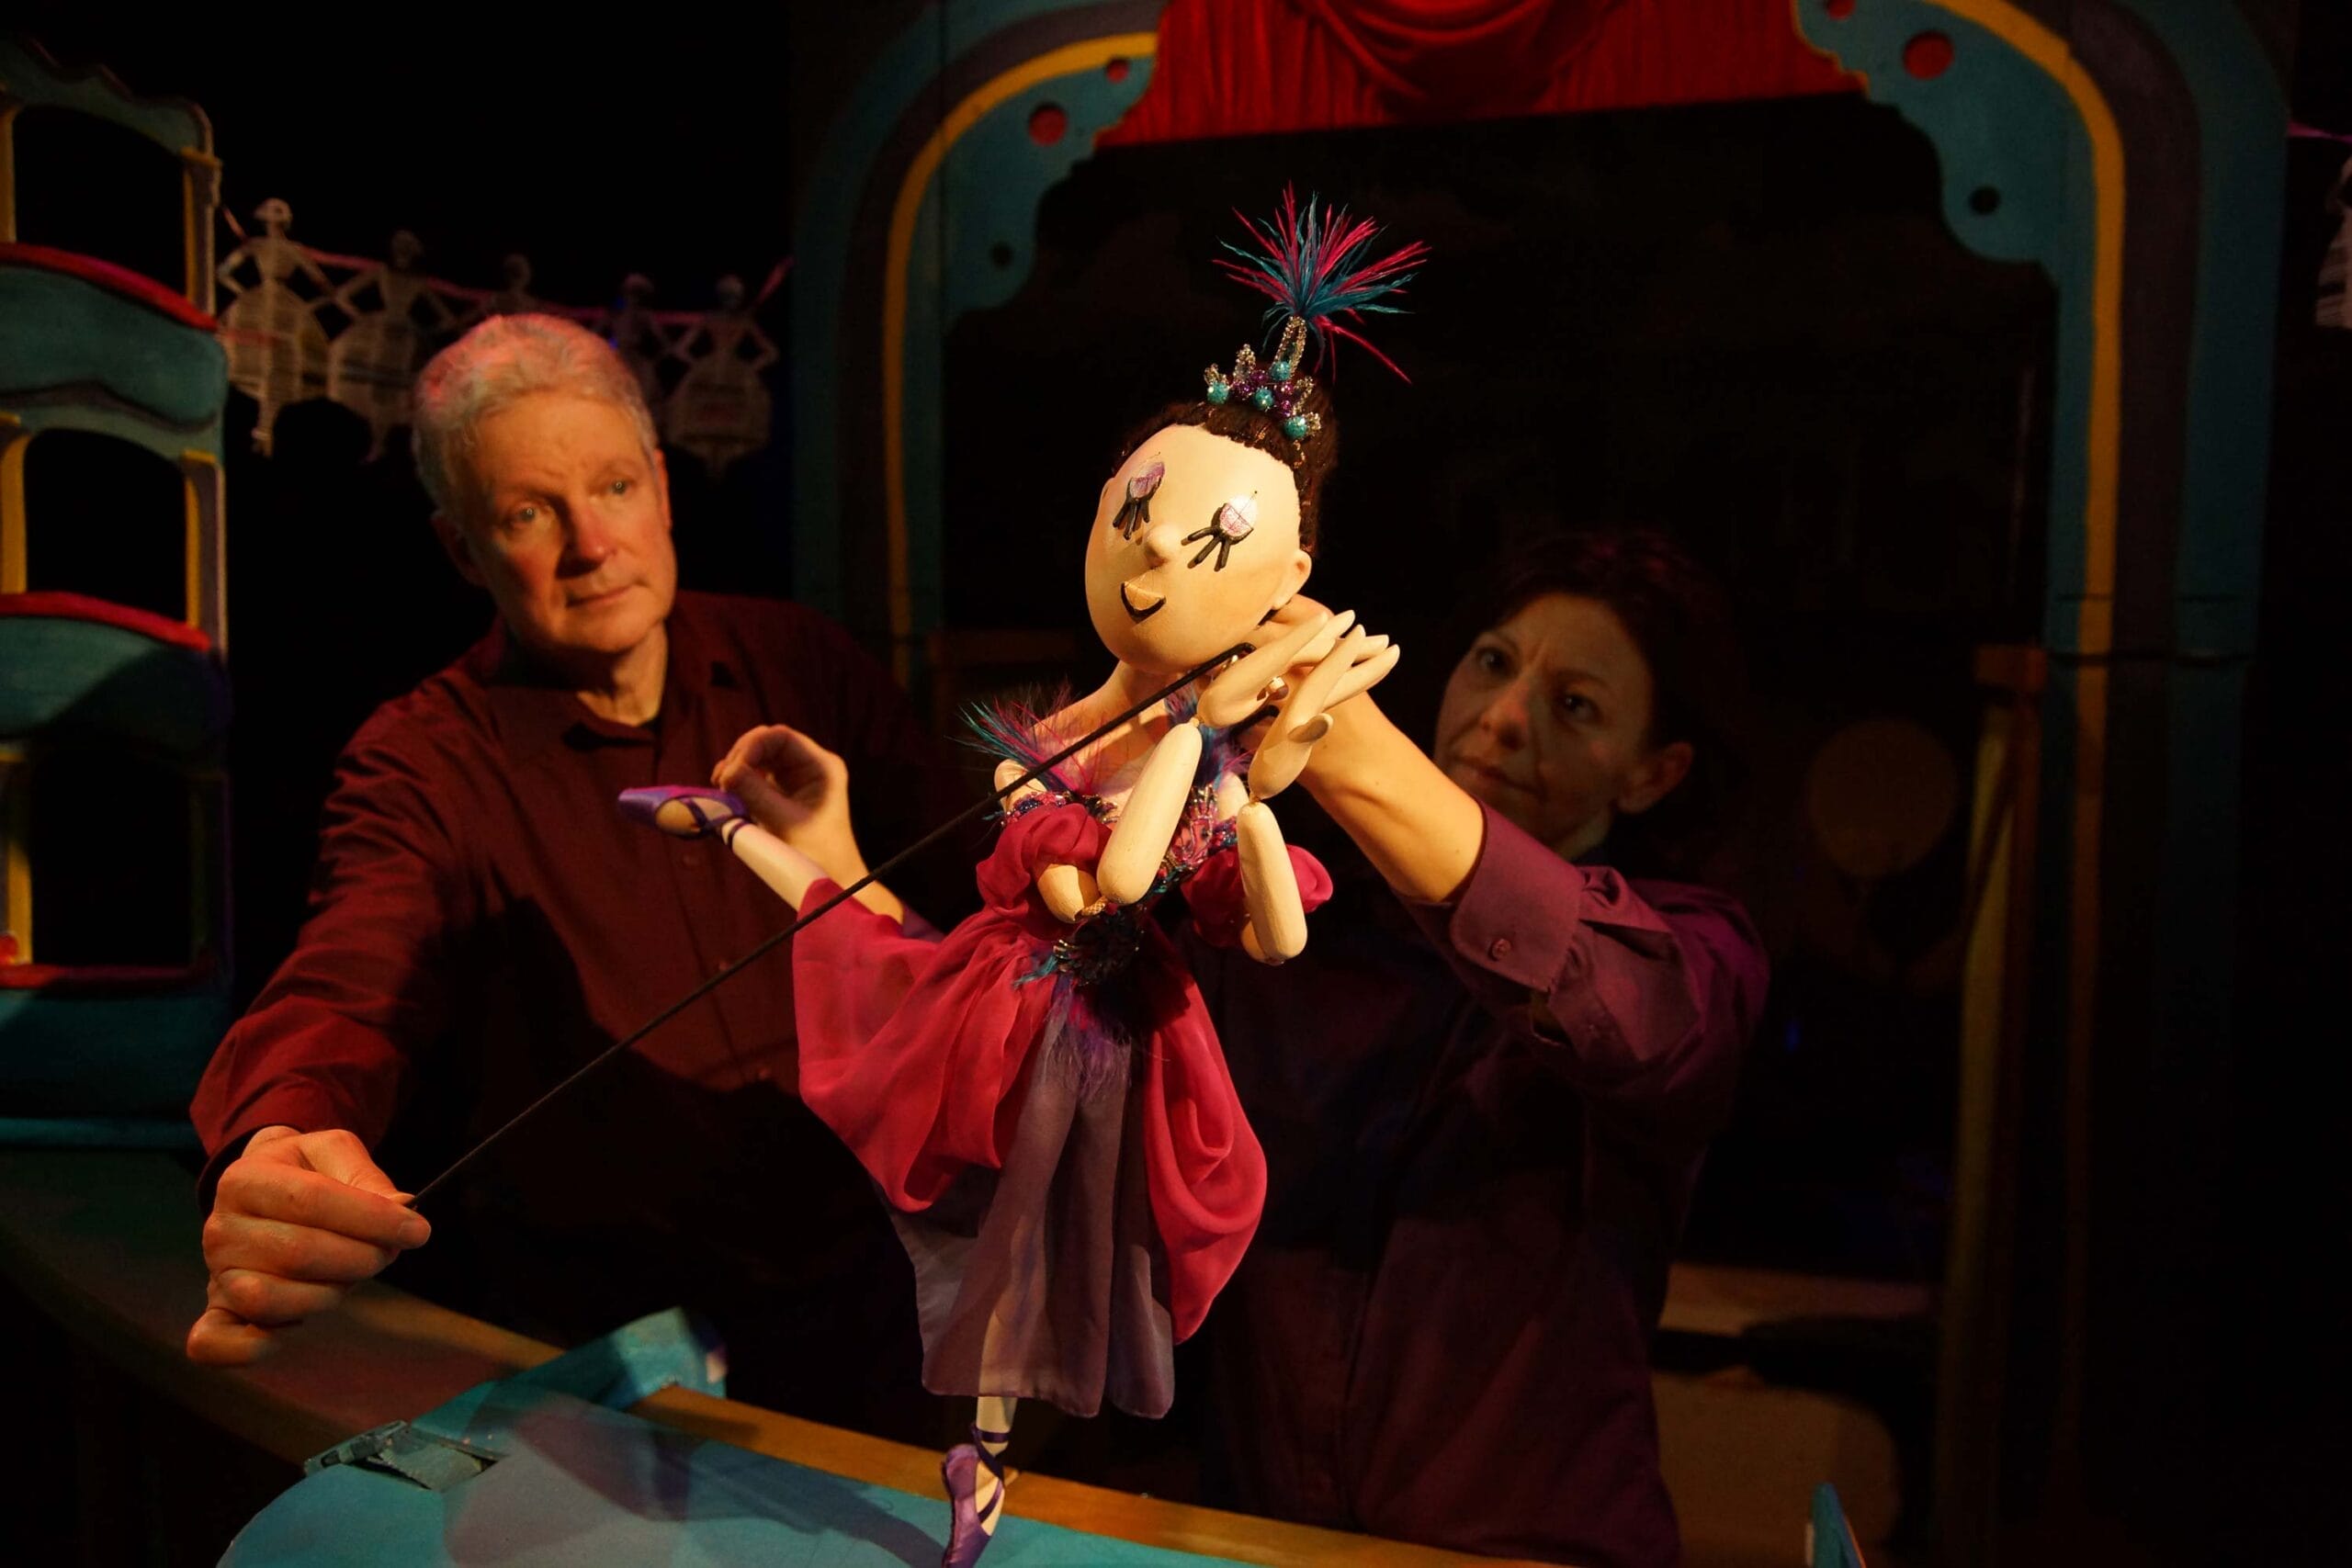 Two puppeteers hold a wooden ballerina puppet as she gracefully balances on one leg